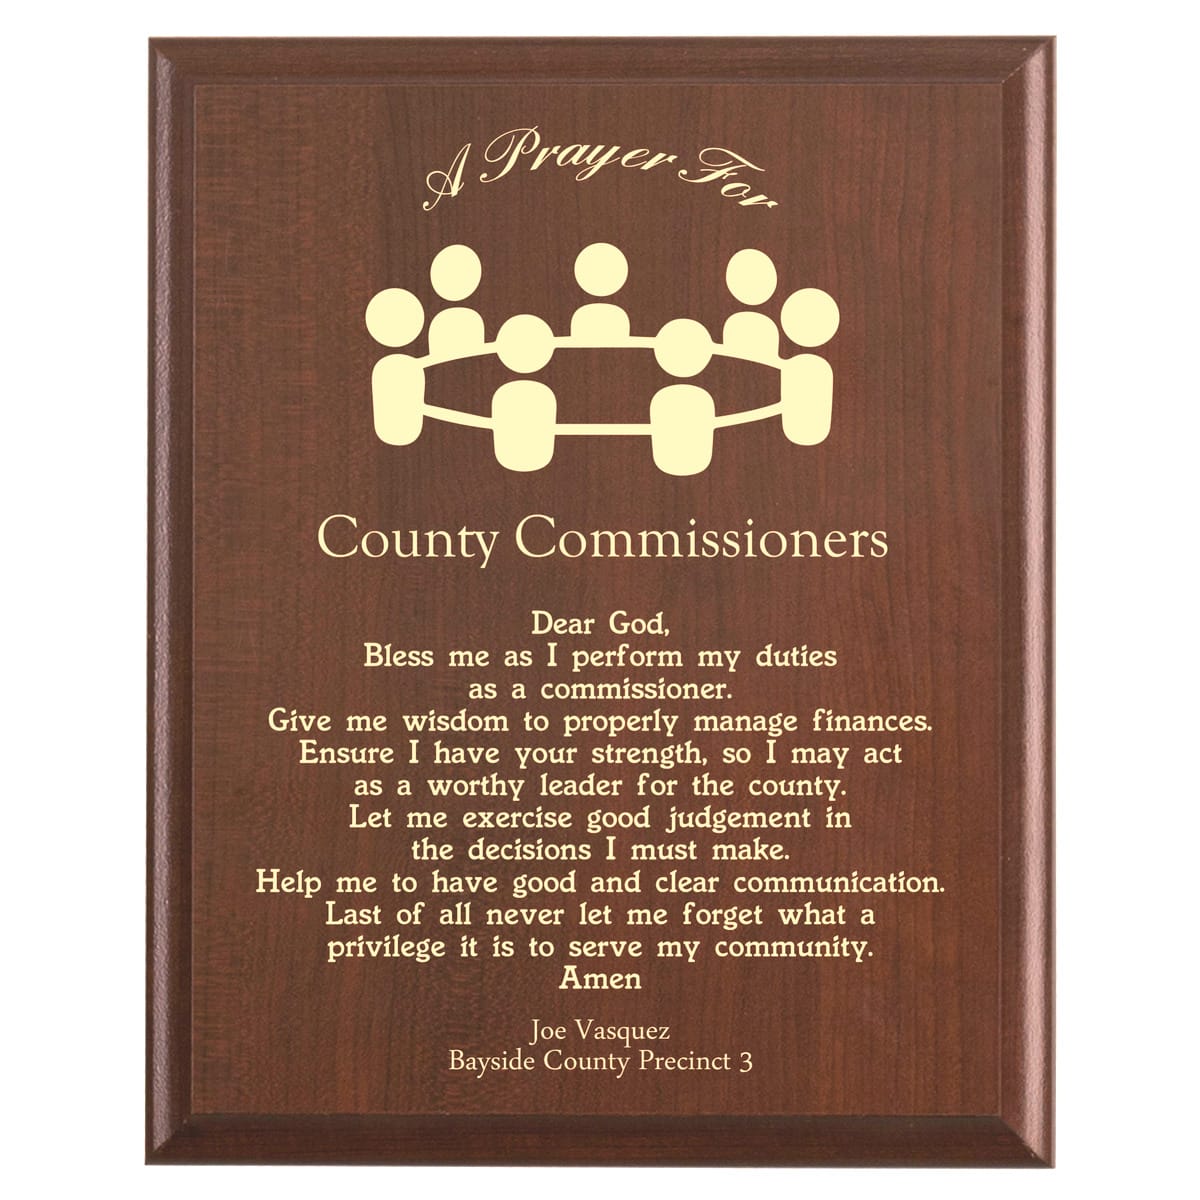 Plaque photo: County Commissioner Prayer Plaque design with free personalization. Wood style finish with customized text.